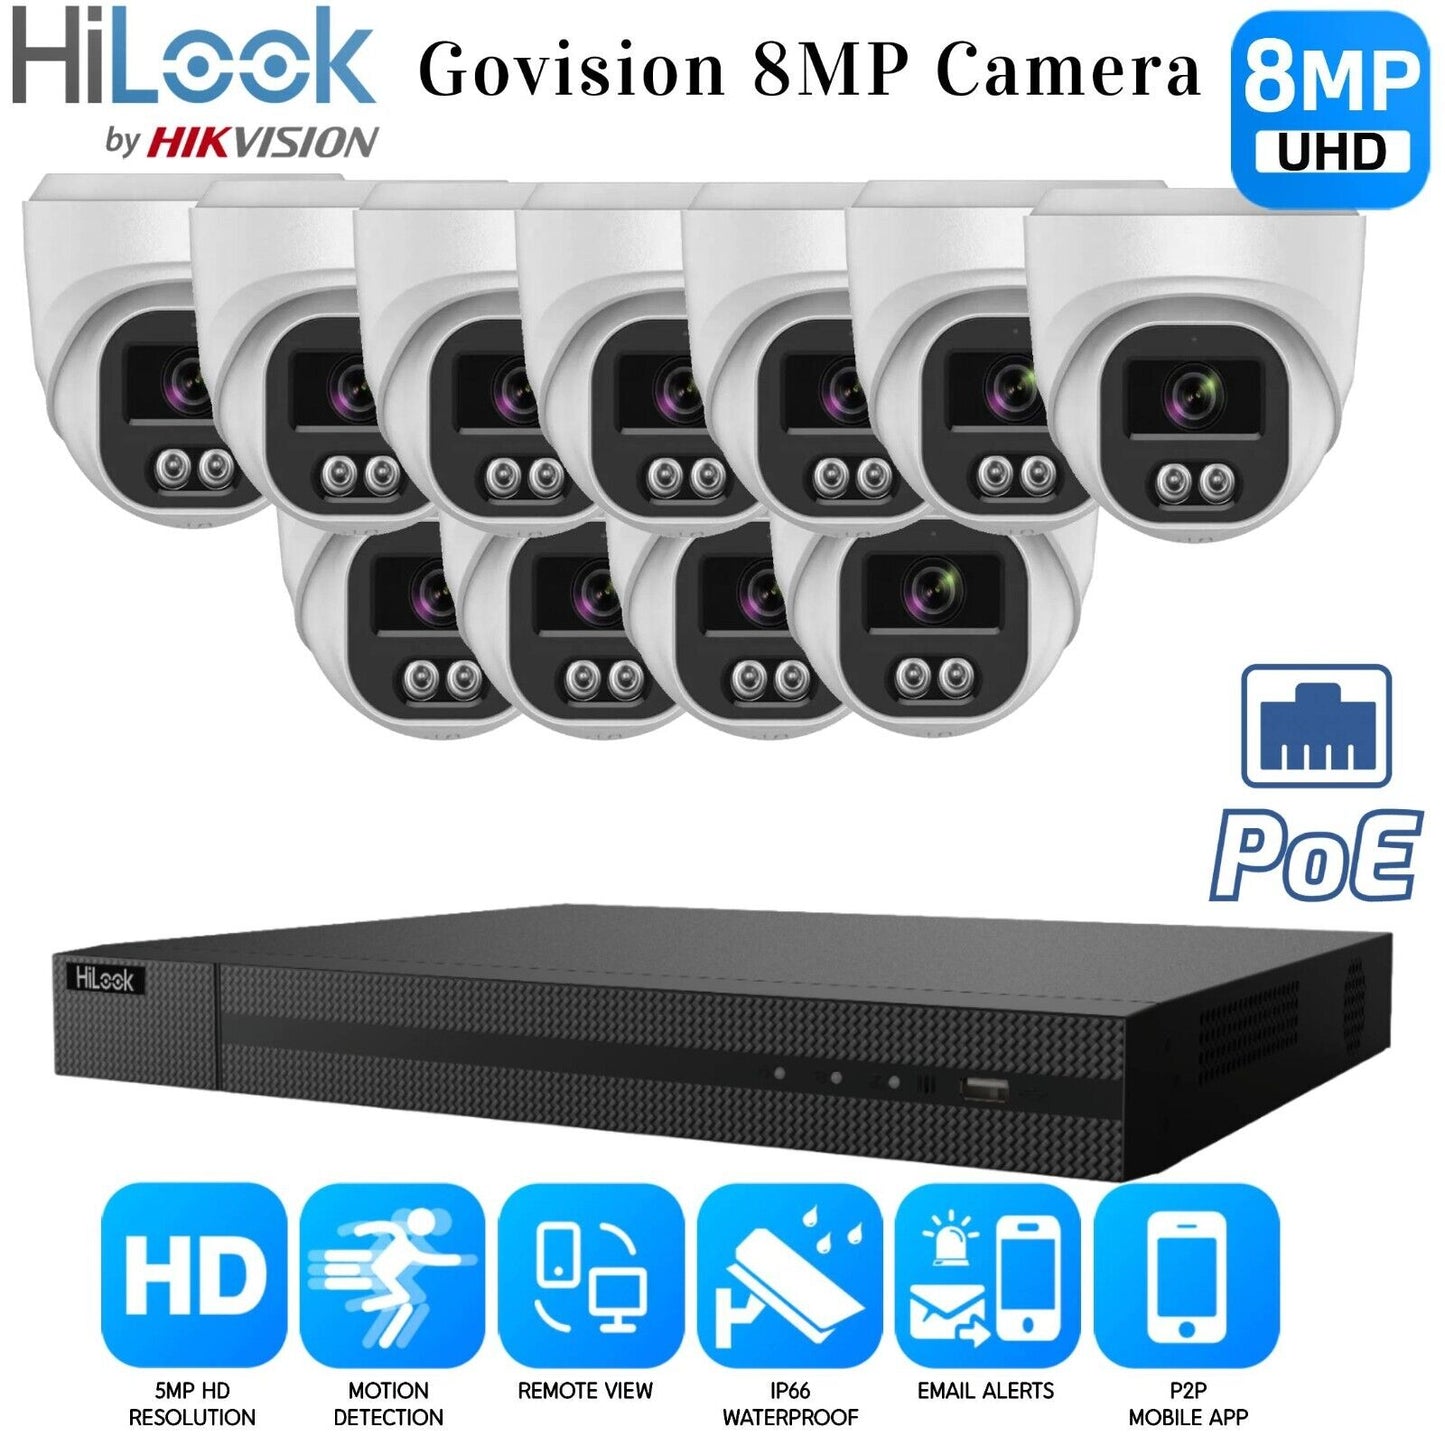 HIKVISION CCTV SYSTEM IP POE 8MP AUDIO MIC CAMERA SMART NIGHTVISION SECURITY KIT 16CH NVR 11x Cameras 2TB HDD